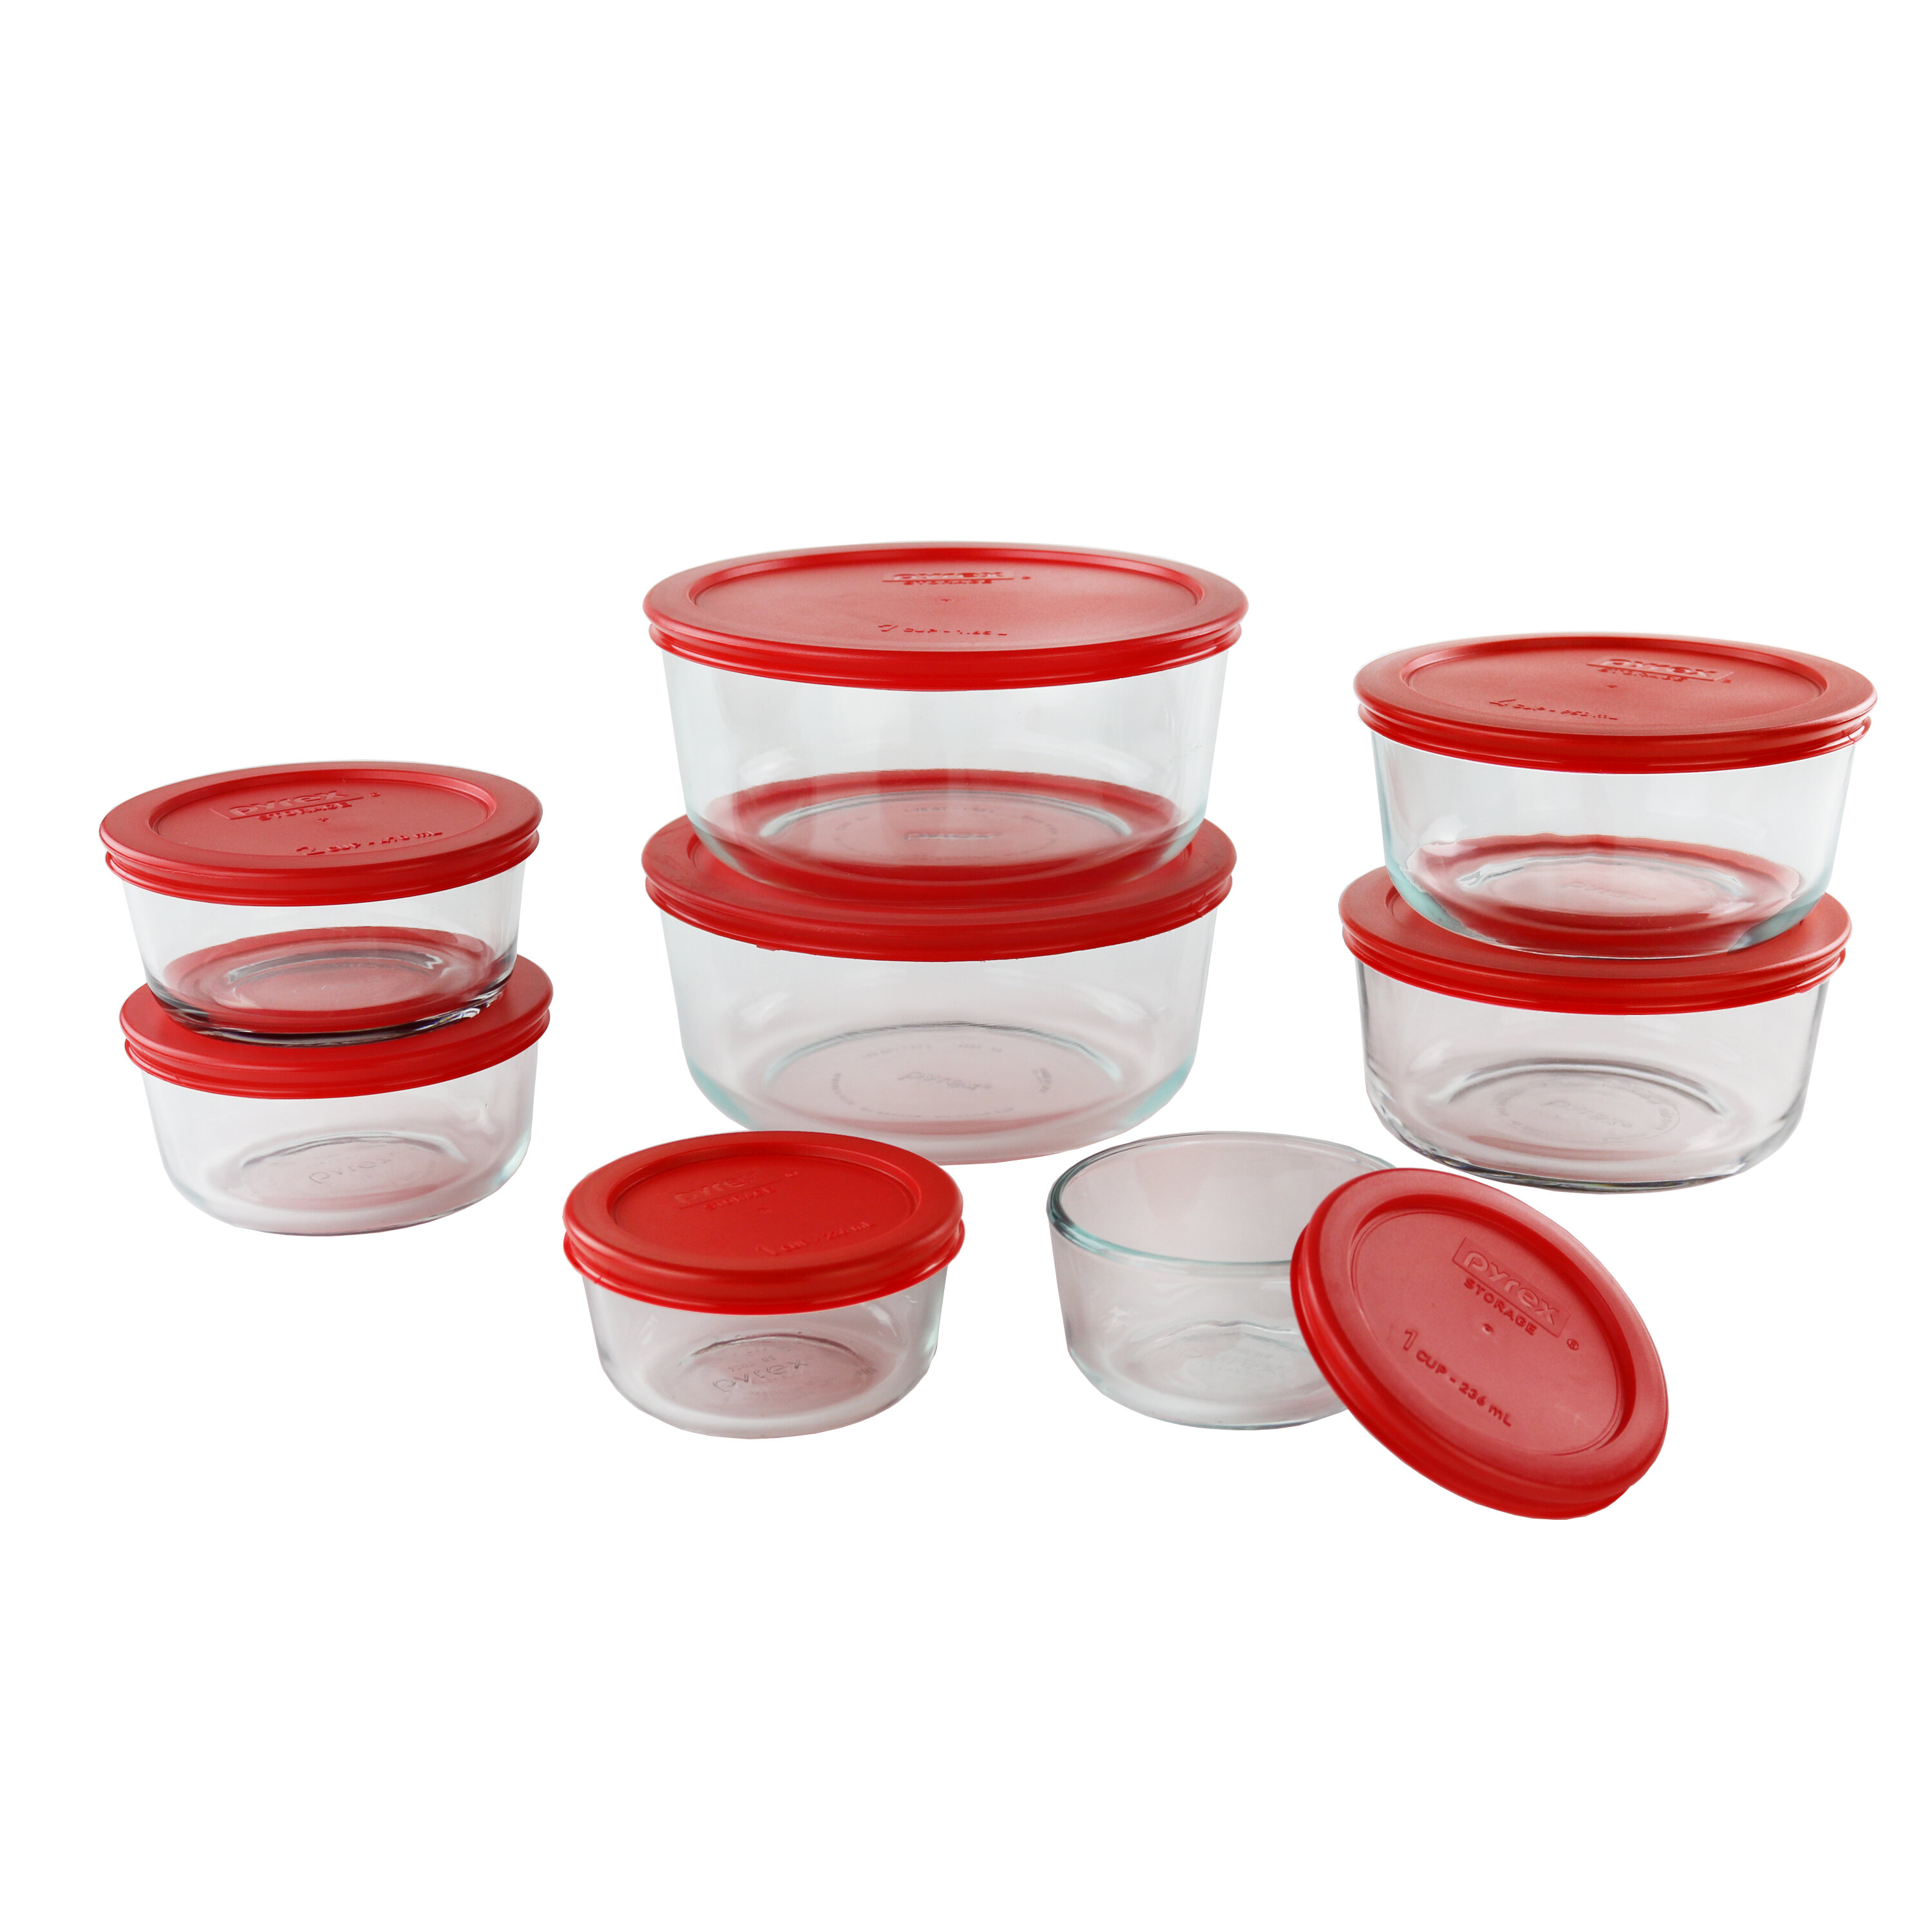 Simply Store Nesting Glass 8 Container Food Storage Set